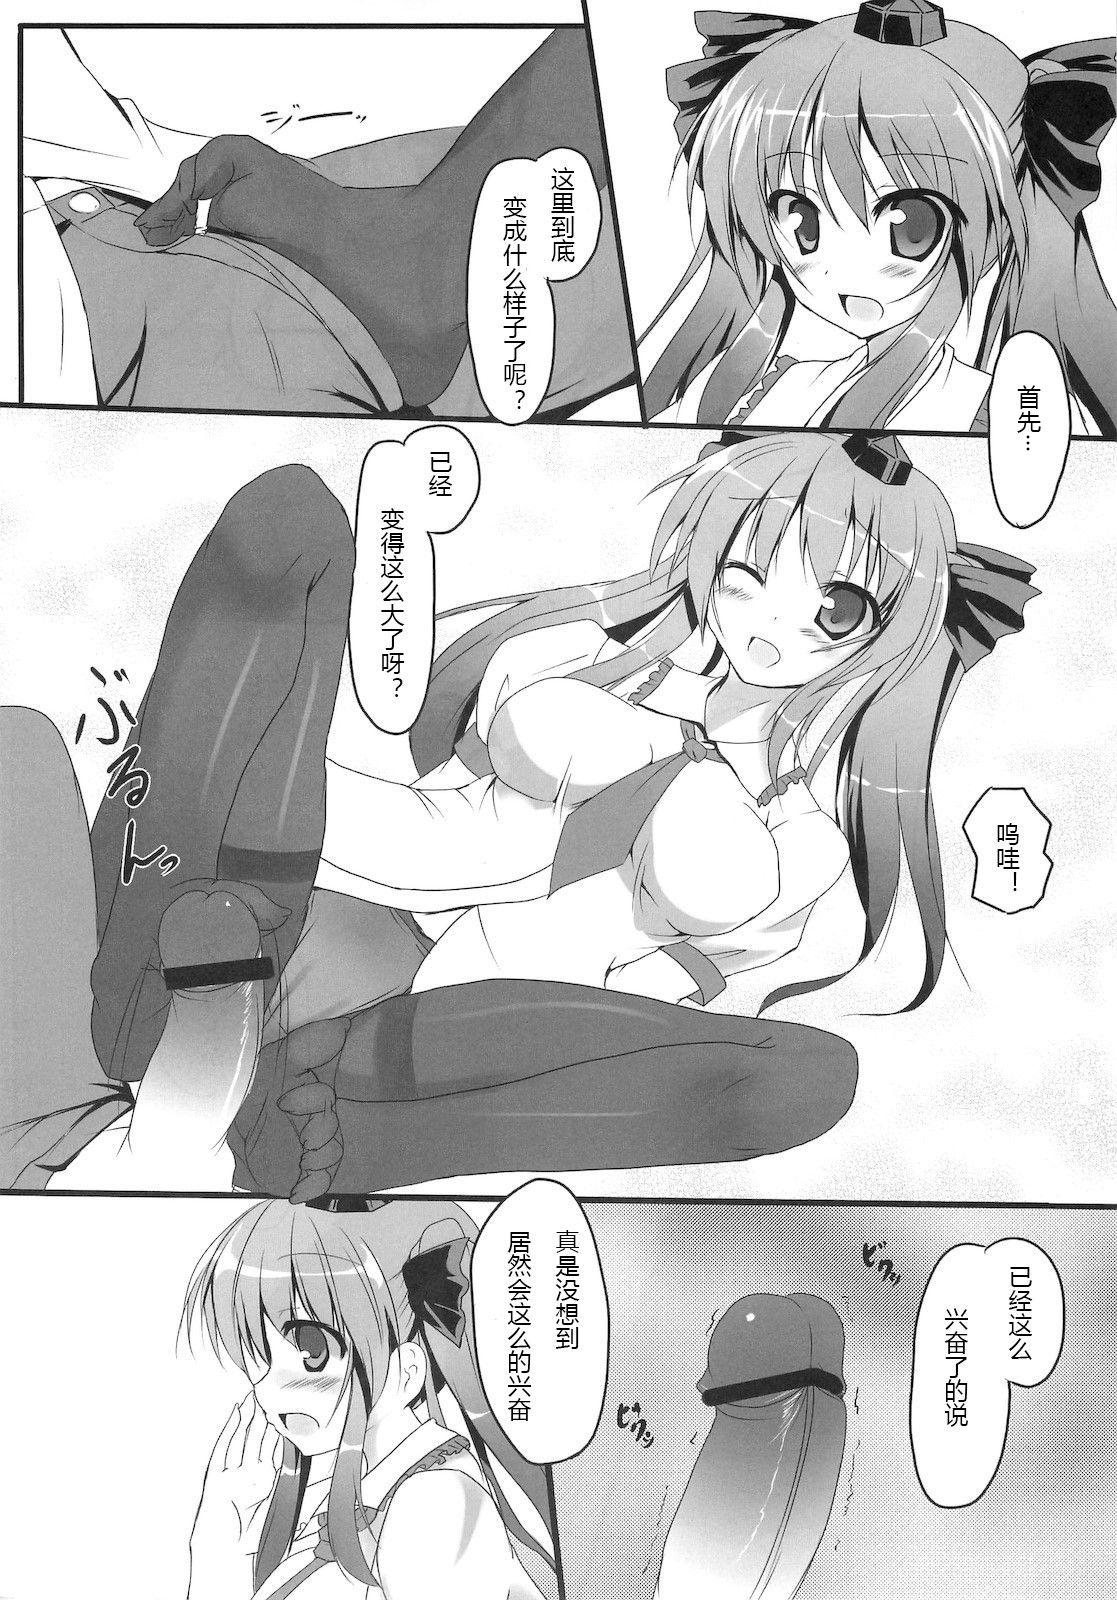 Hot Women Having Sex Hata Love! - Touhou project Concha - Page 5